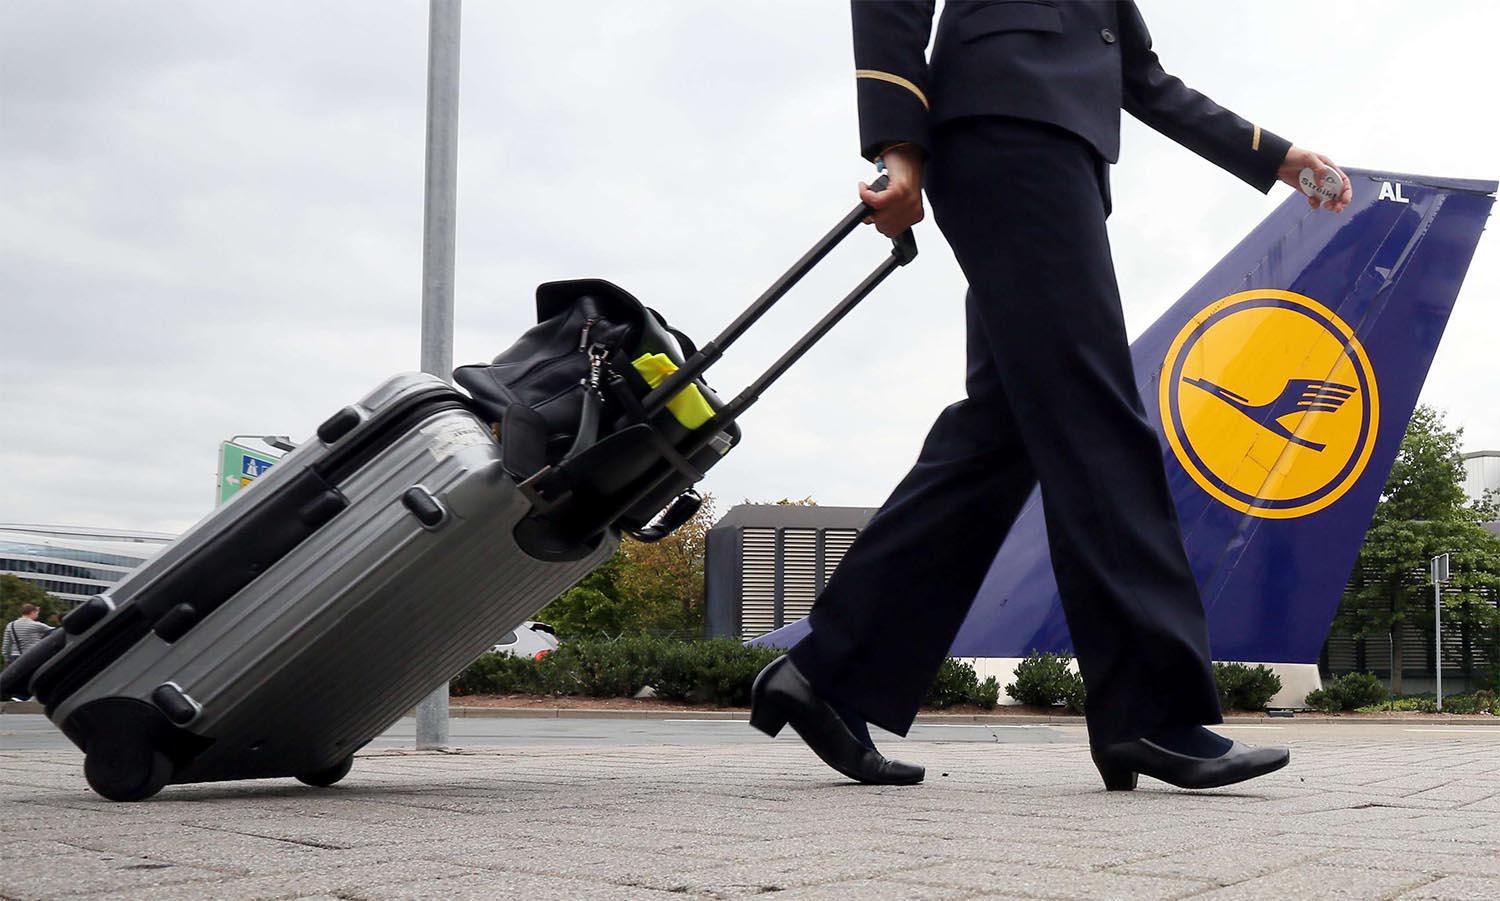 A flight attendant pulls his suitcase prior to a flight at the Lufthansa base of the Frankfurt airport